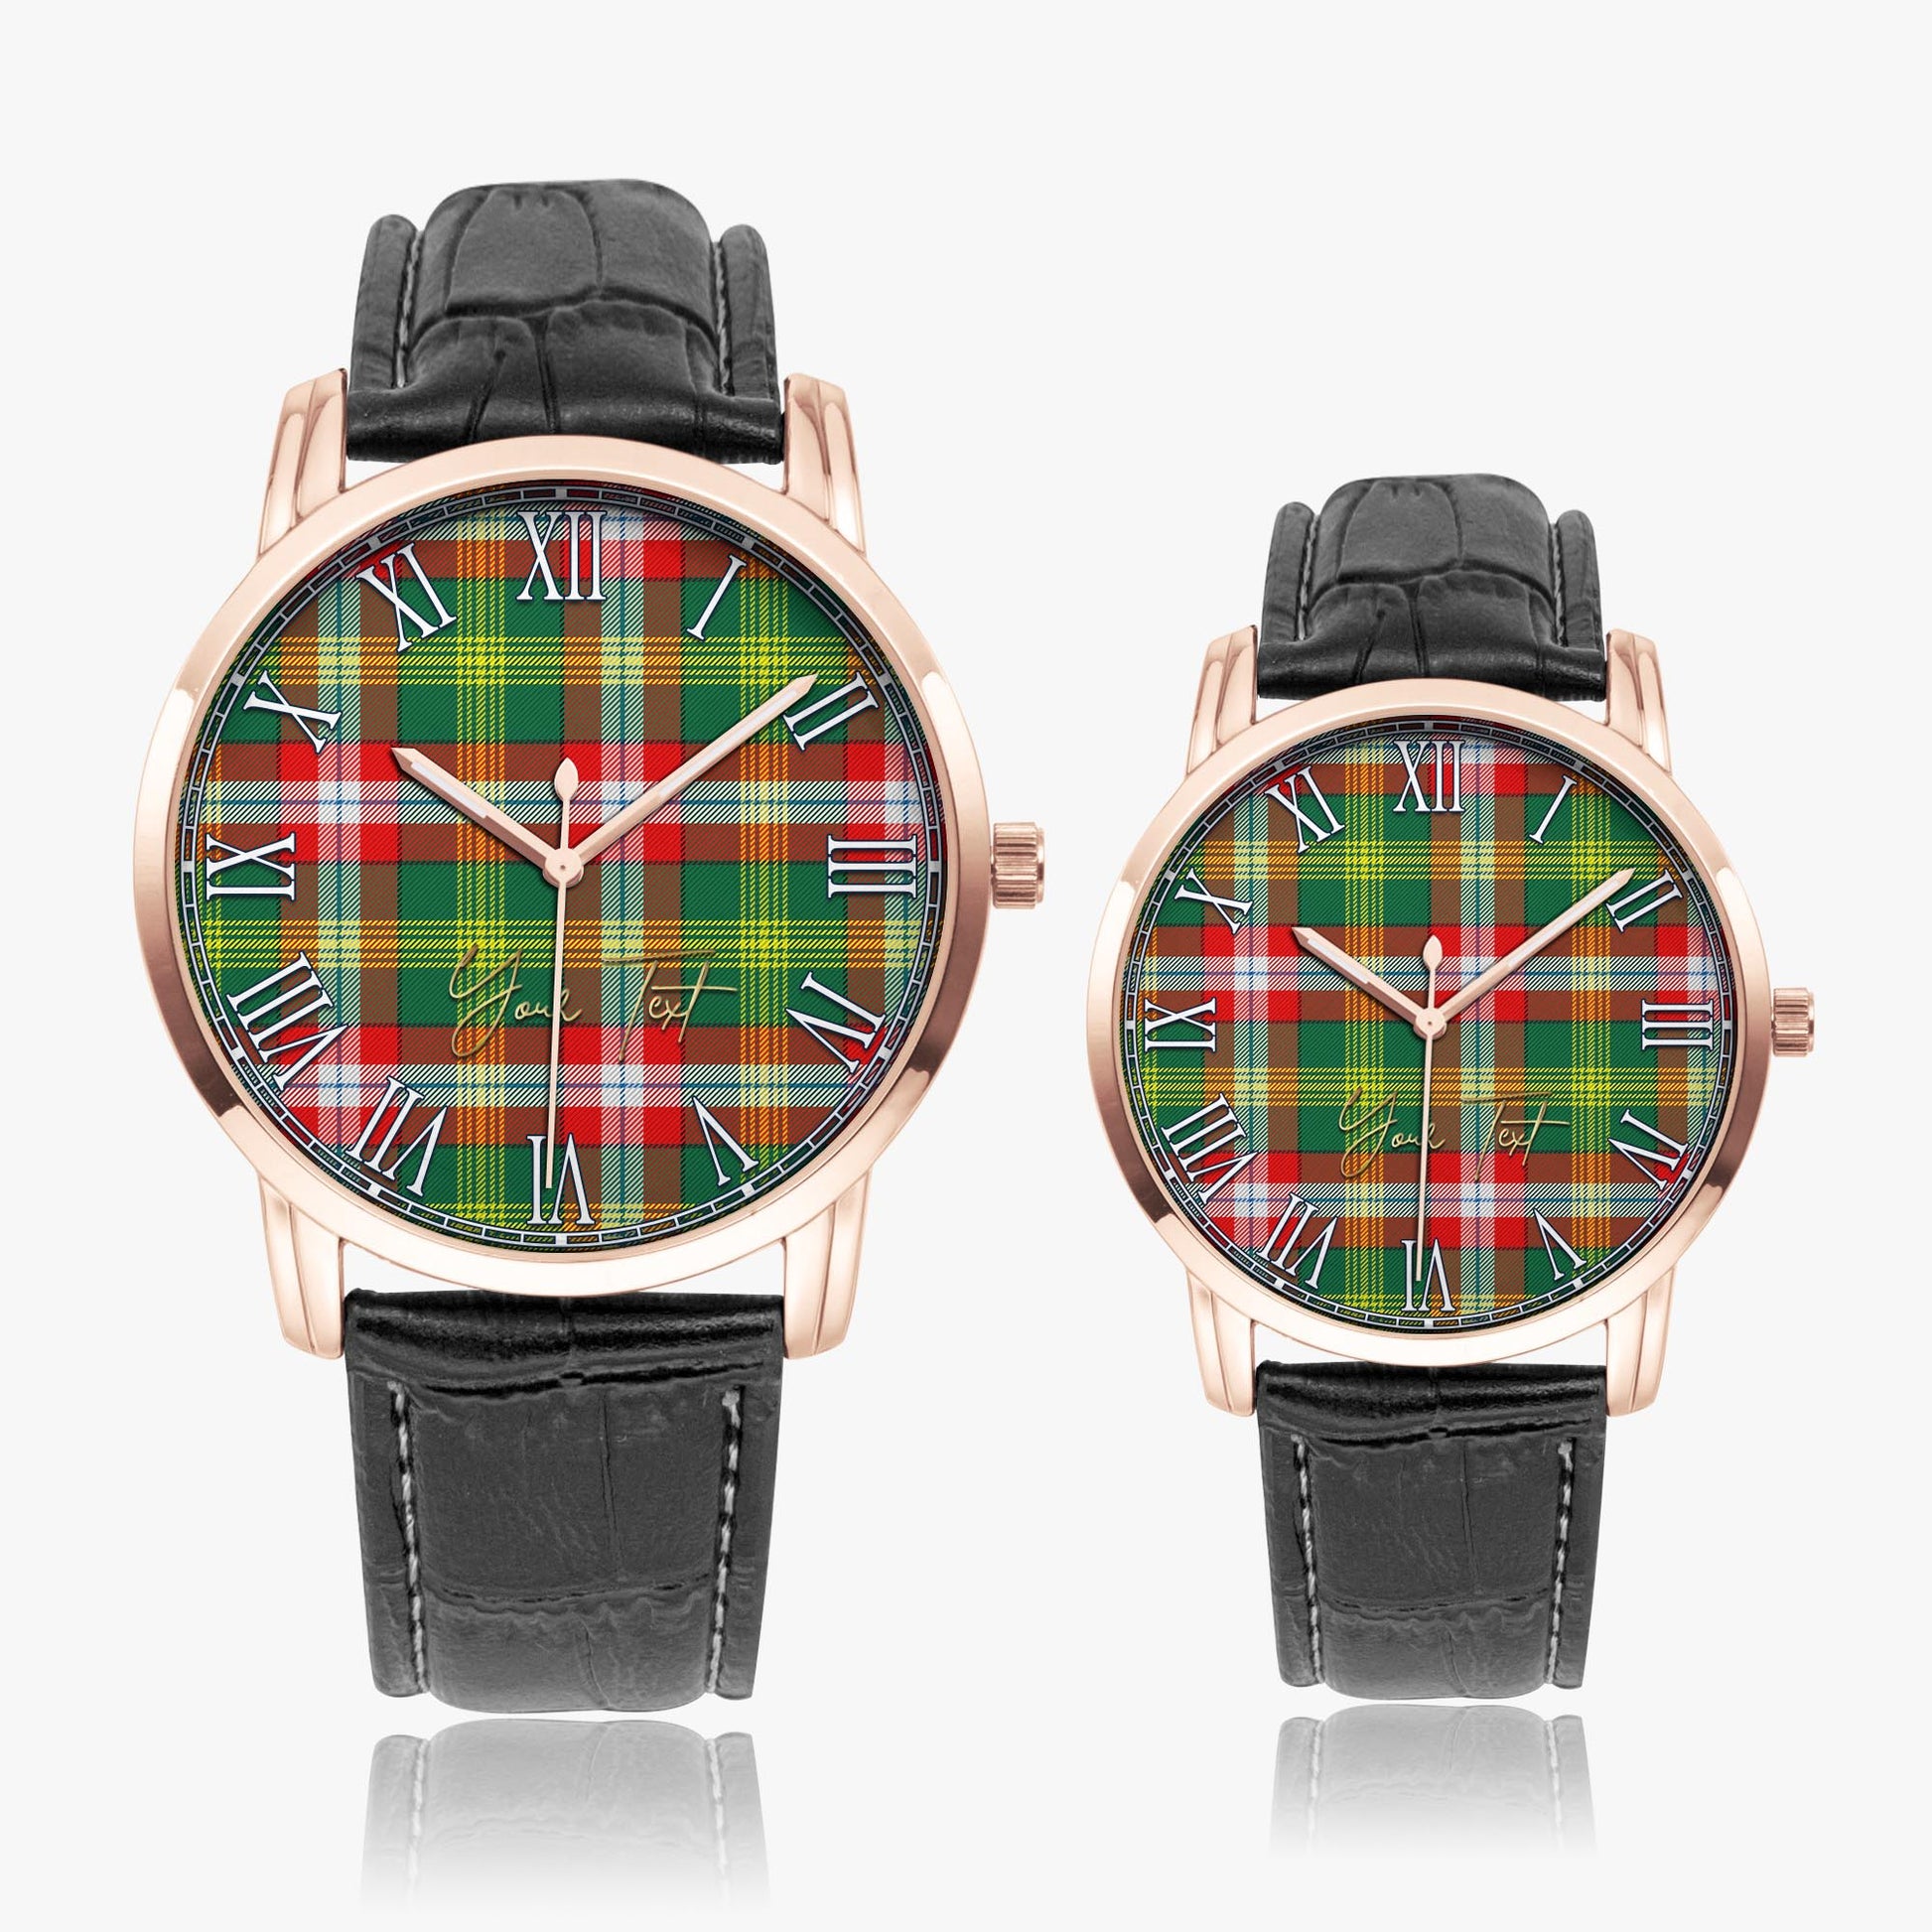 Northwest Territories Canada Tartan Personalized Your Text Leather Trap Quartz Watch Wide Type Rose Gold Case With Black Leather Strap - Tartanvibesclothing